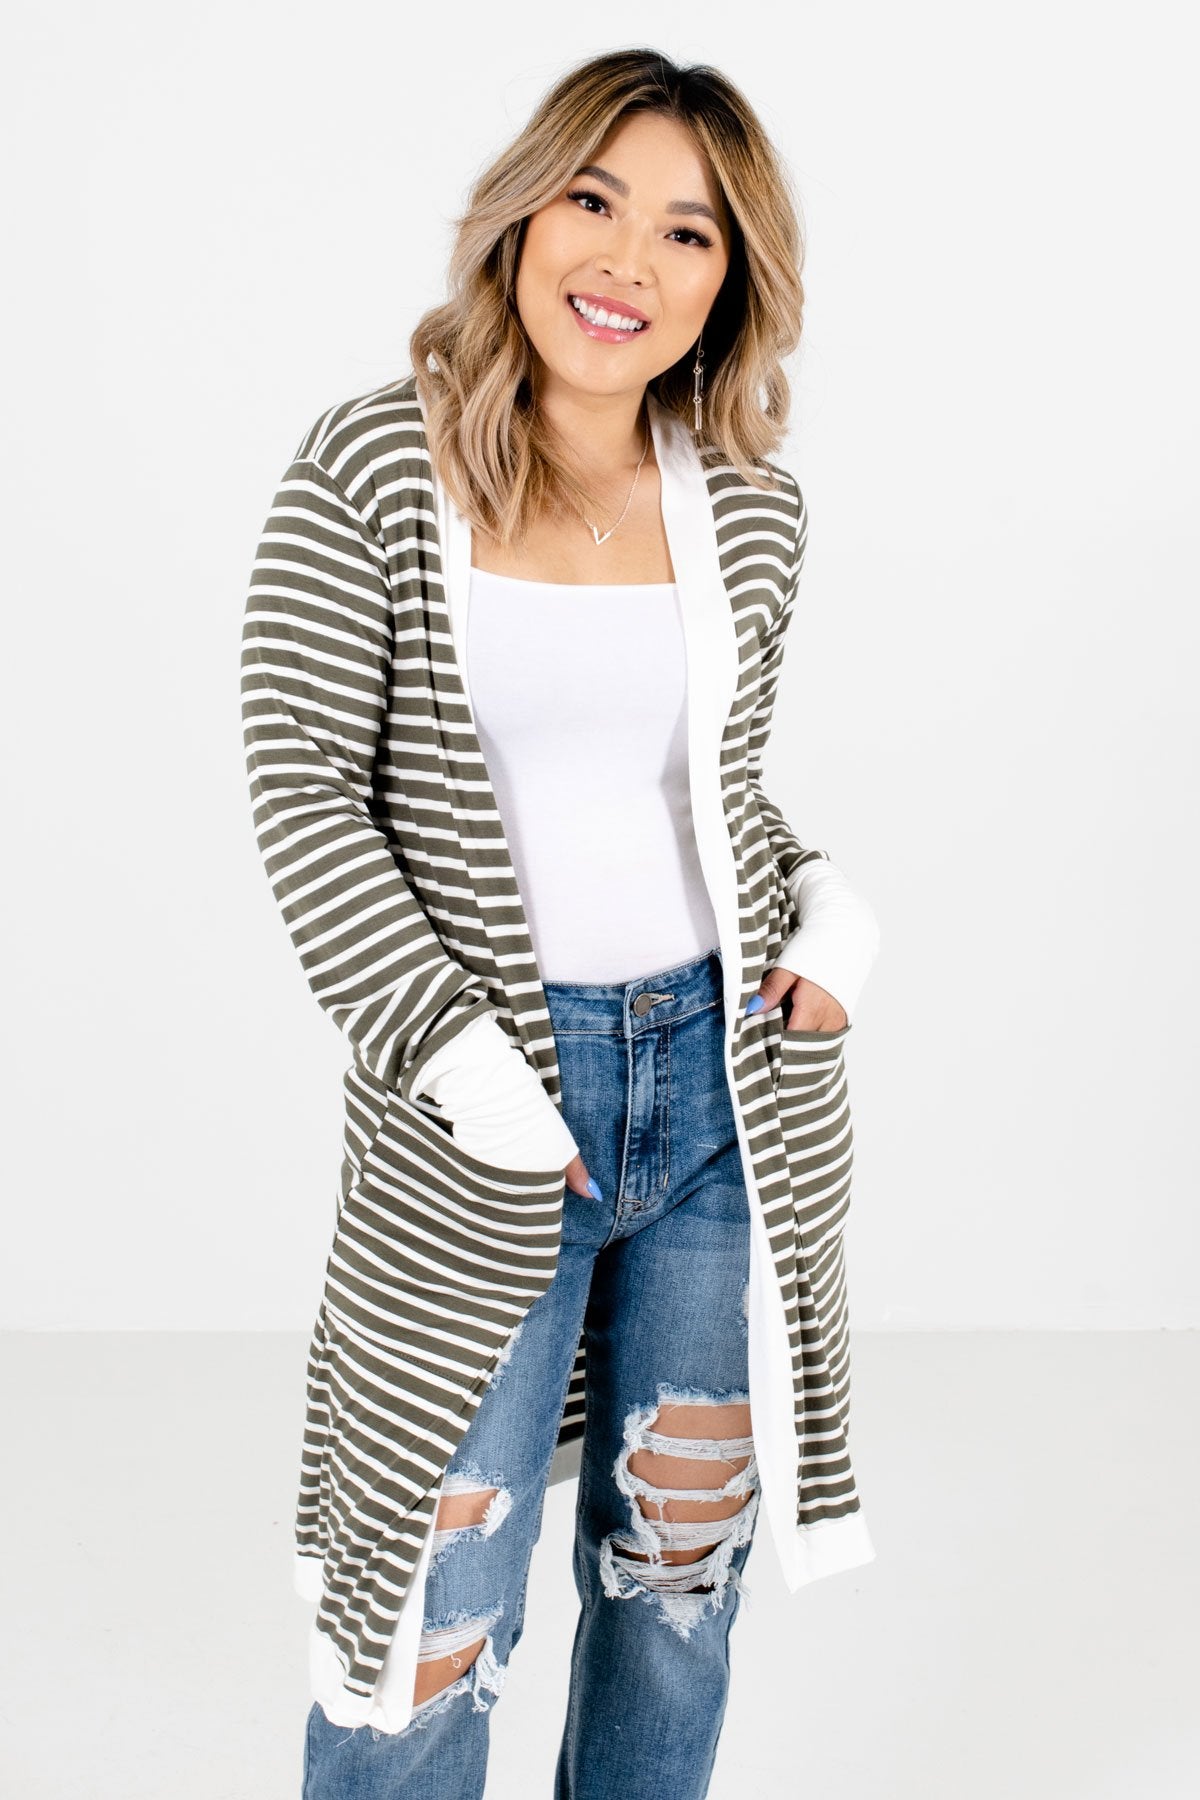 Olive and White Striped Pattern Boutique Cardigans for Women